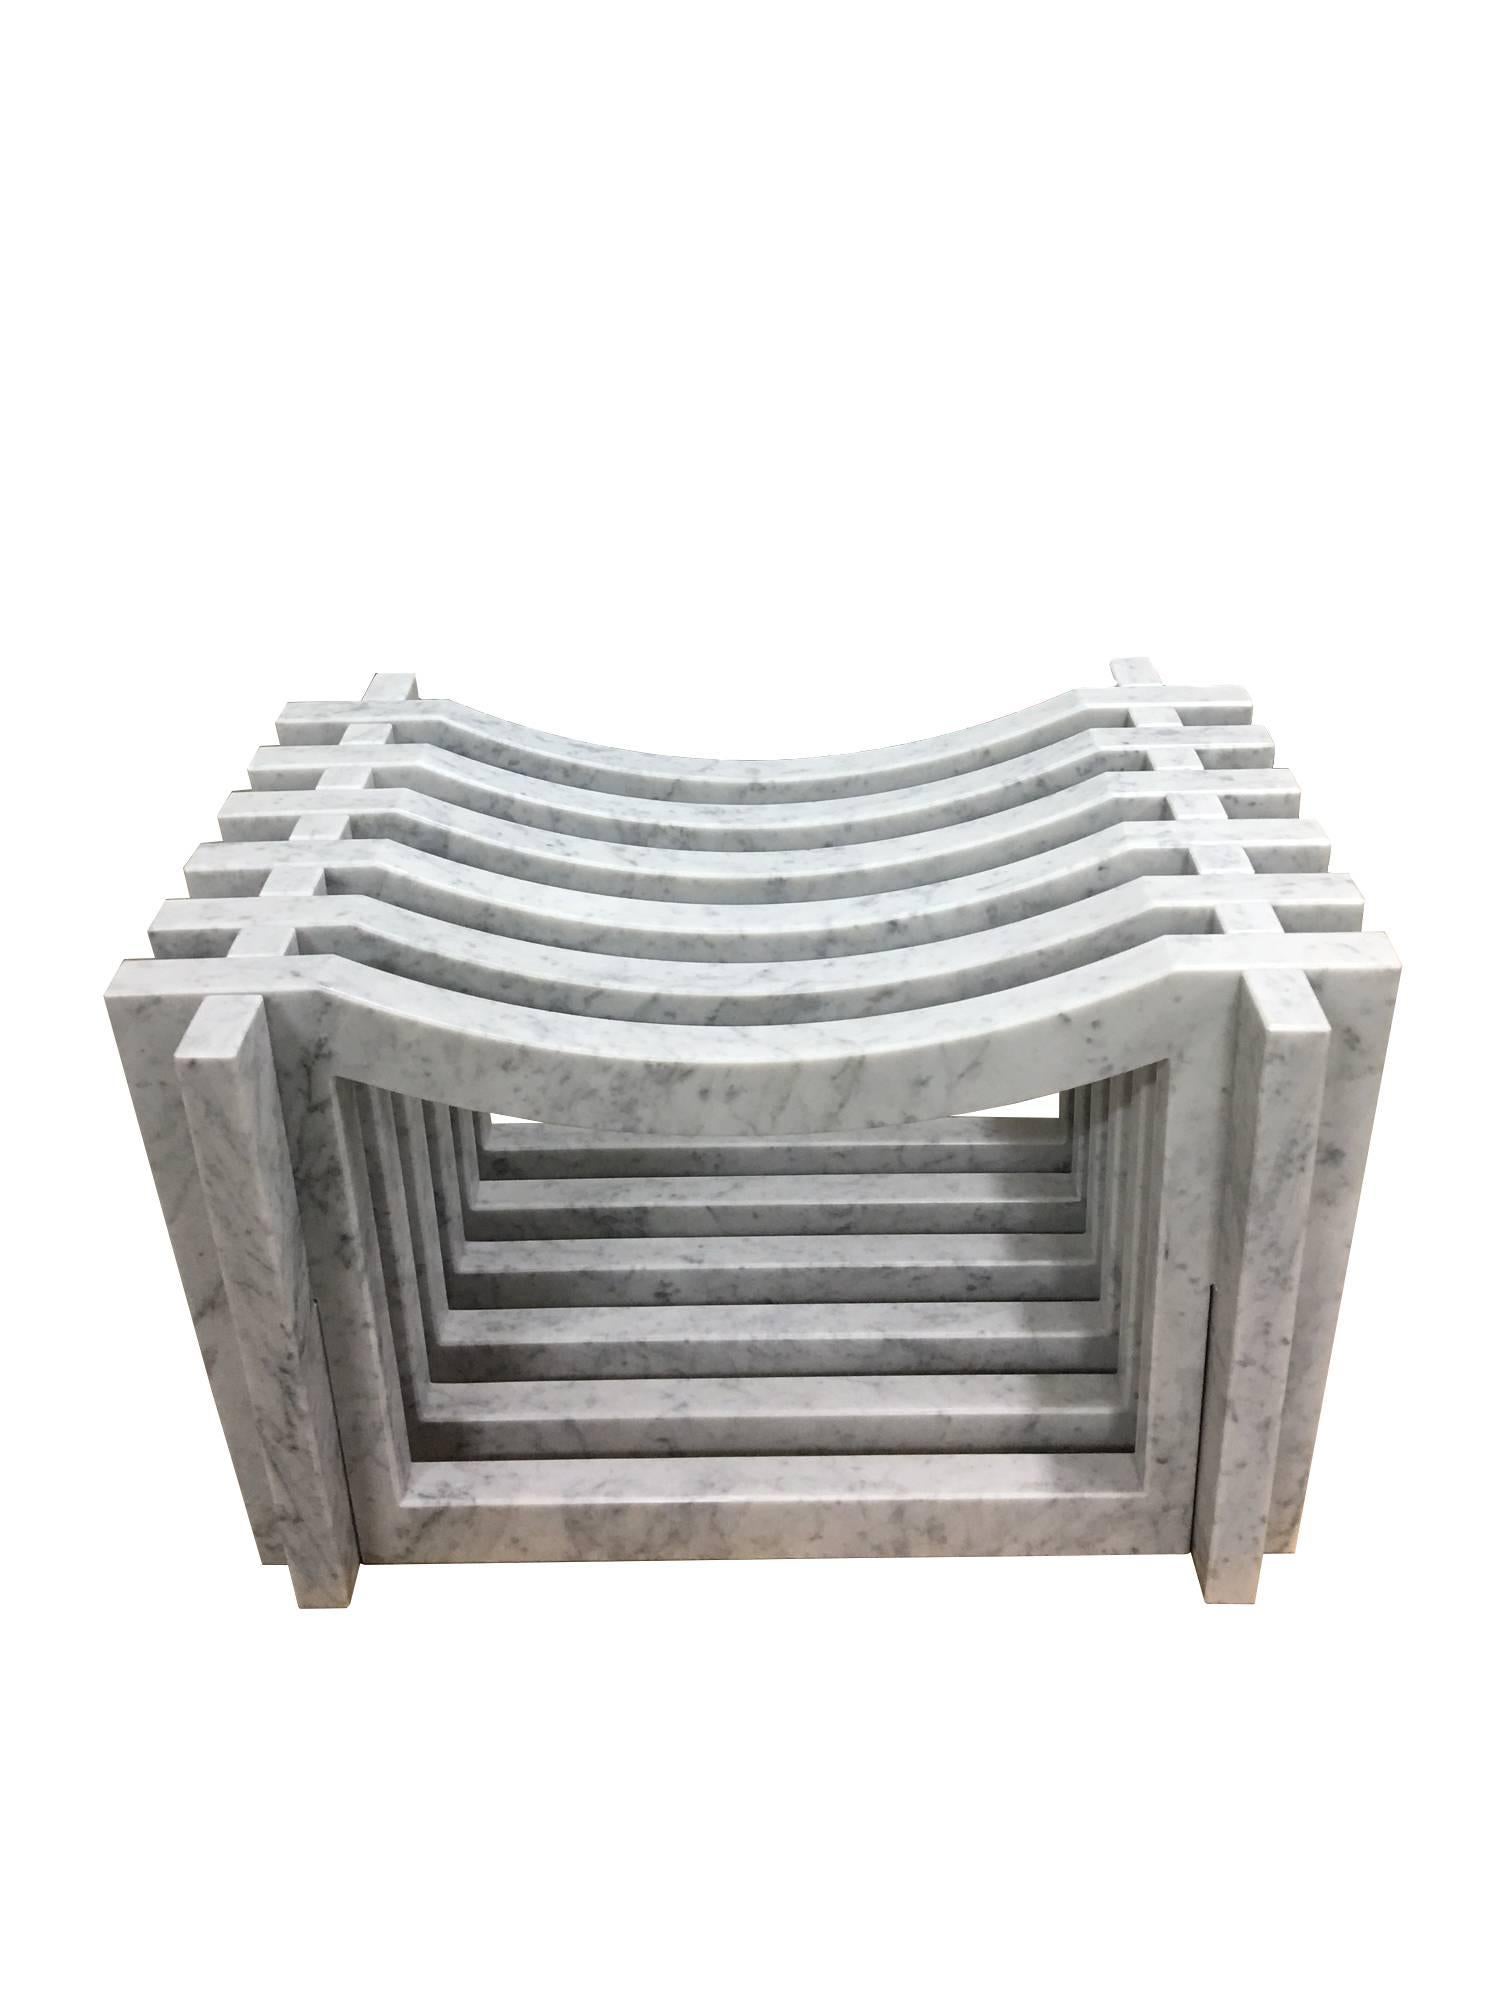 Italian white Carrara marble benches or stools in a Minimalist aesthetic. Ideal for bath room and shower or garden. The benches are constructed with 6 pieces of marble on 2 inter-stacked open framed marble parts that form the base. Also available in